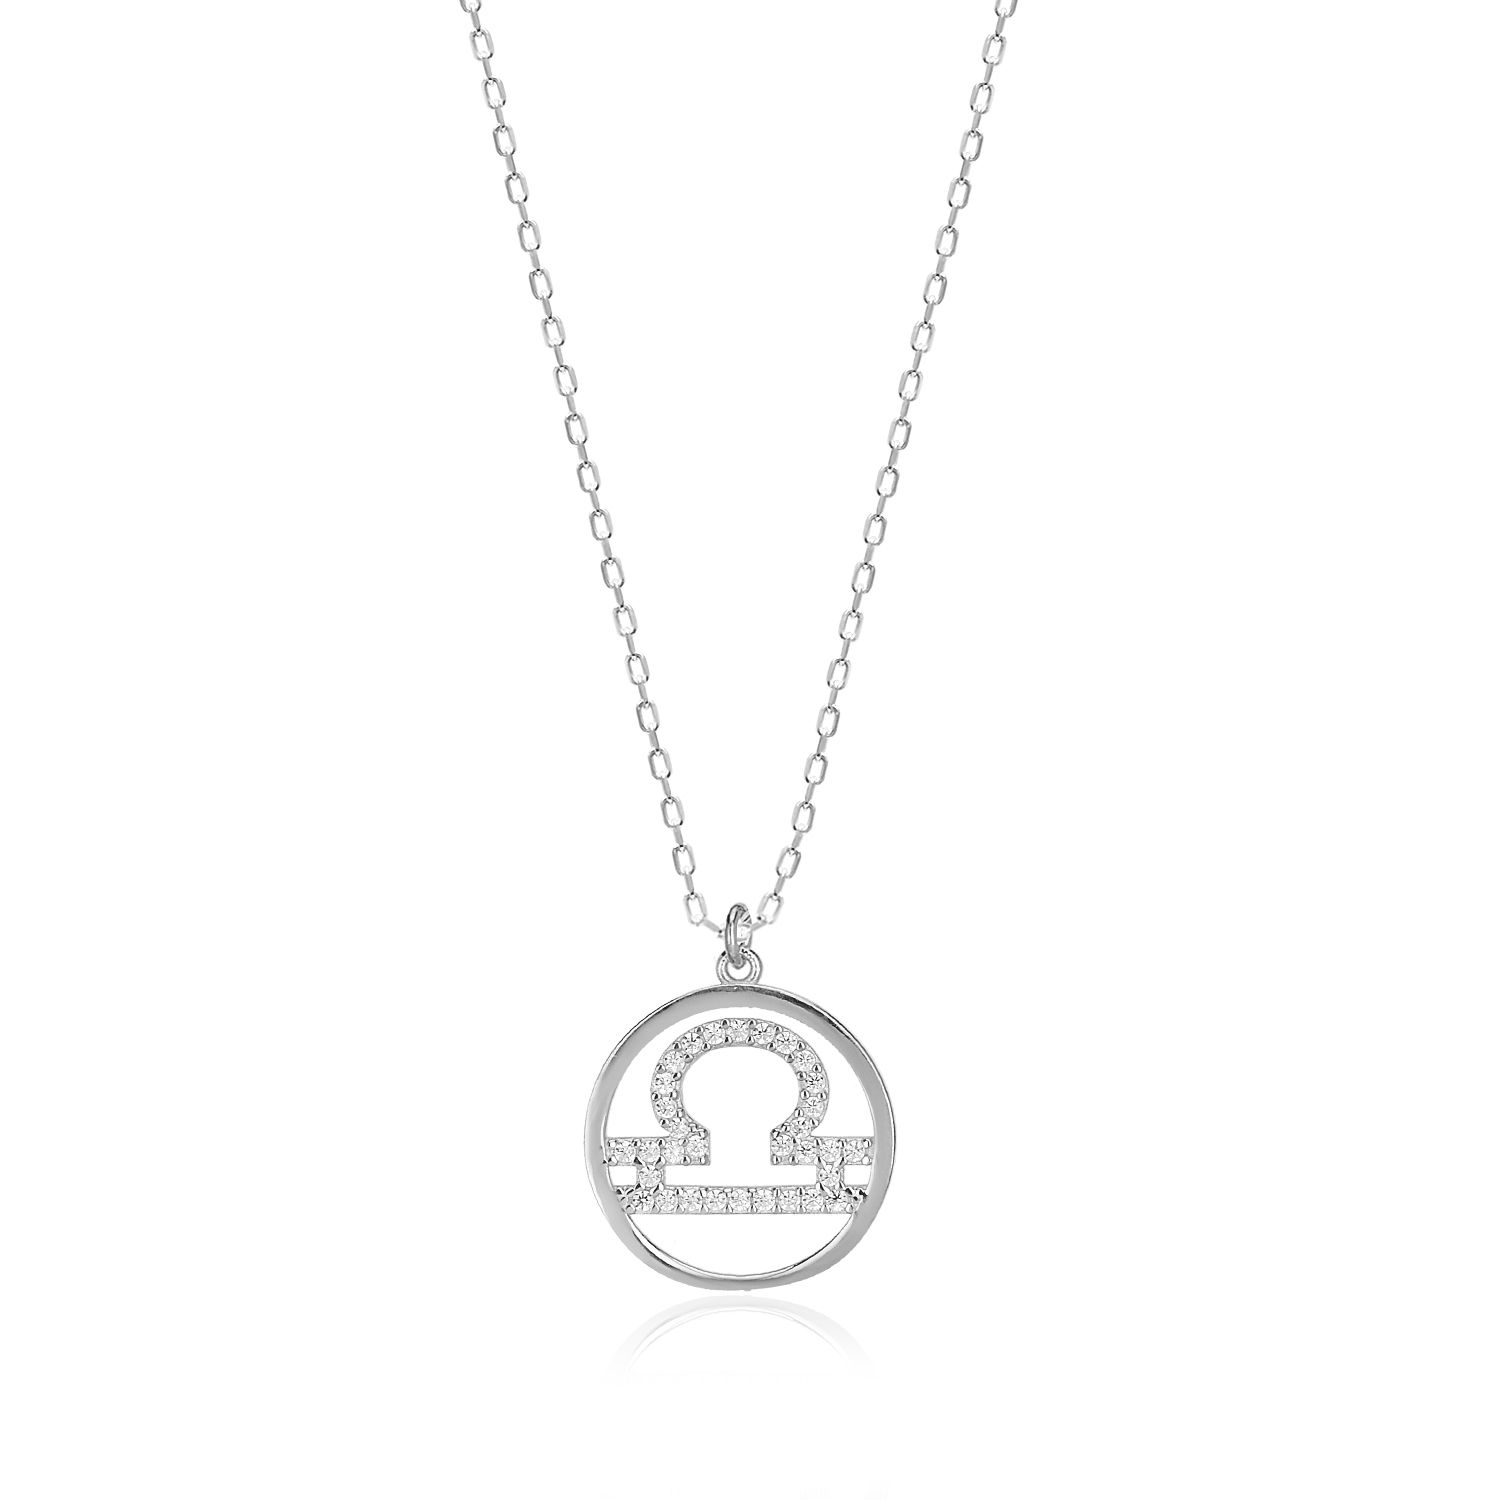 925-sterling-silver-horoscope-necklace-with-cubic-zircon